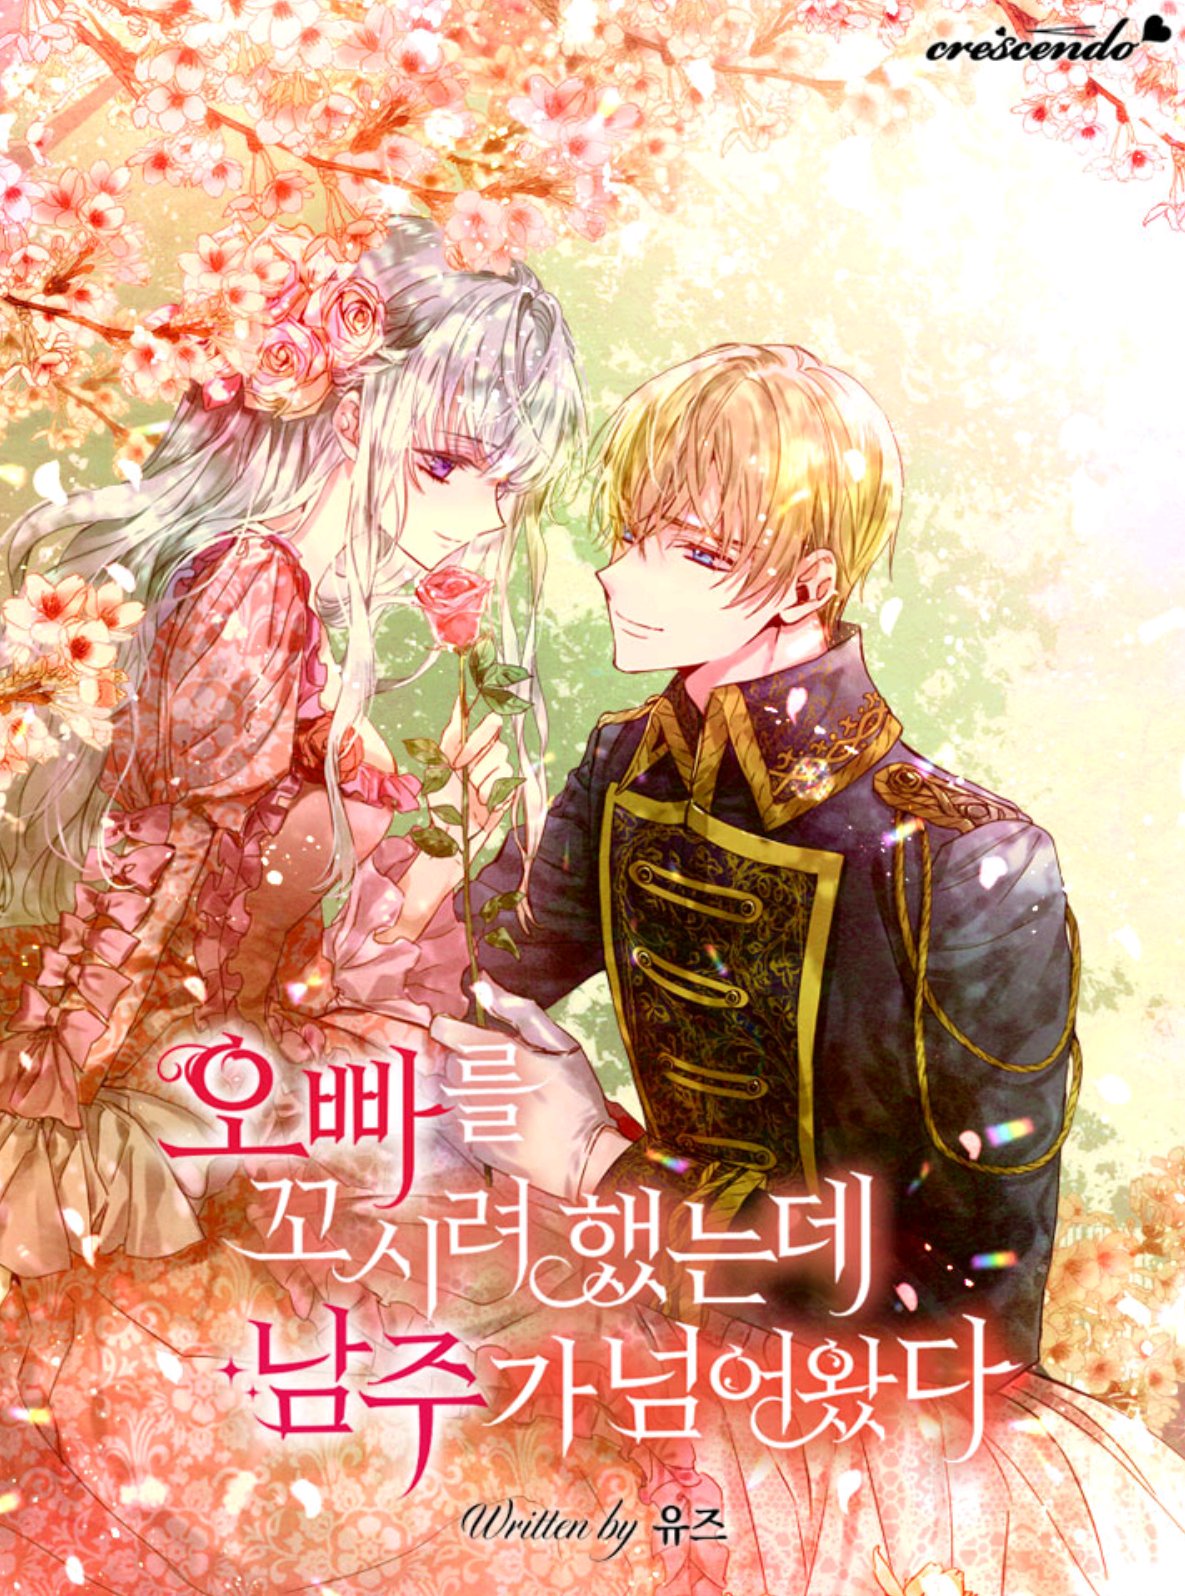 He Was My Brother Manga I Tried to Persuade My Brother and He Entrusted the Male Lead to Me (Promo)  - MangaDex